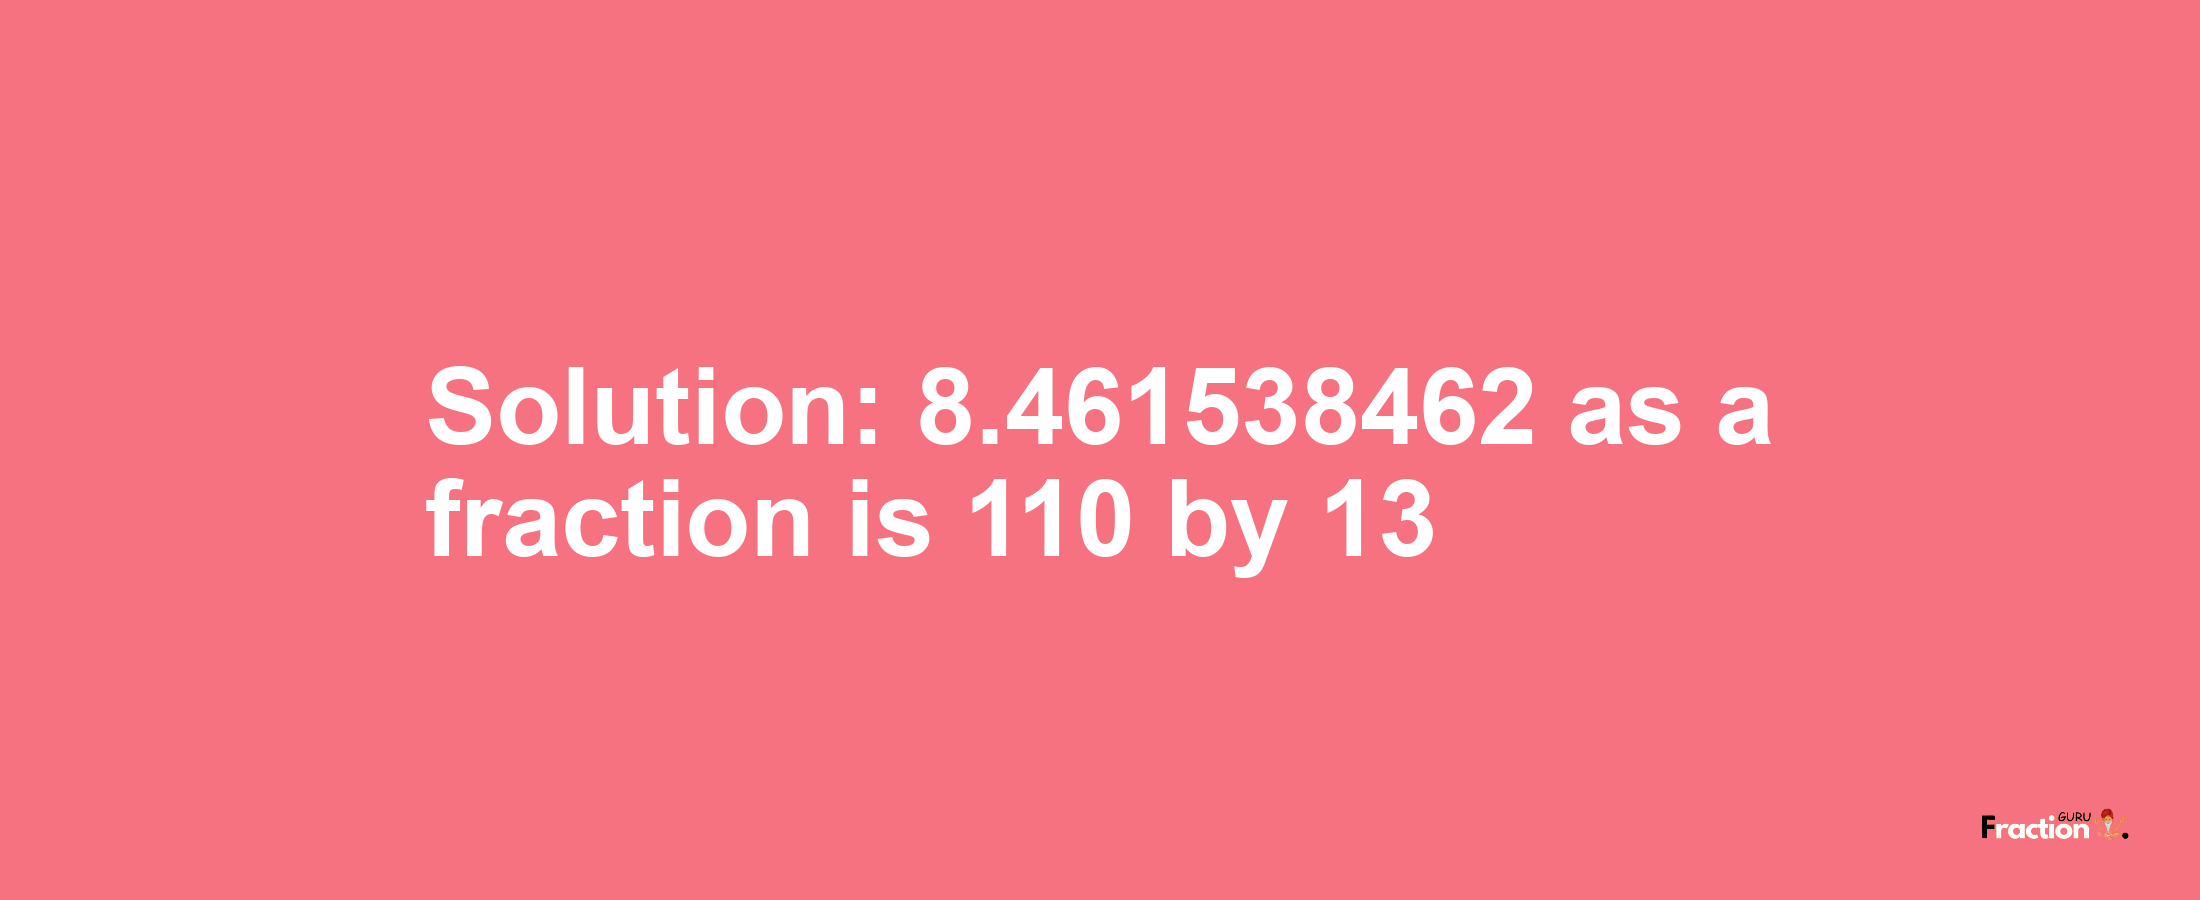 Solution:8.461538462 as a fraction is 110/13